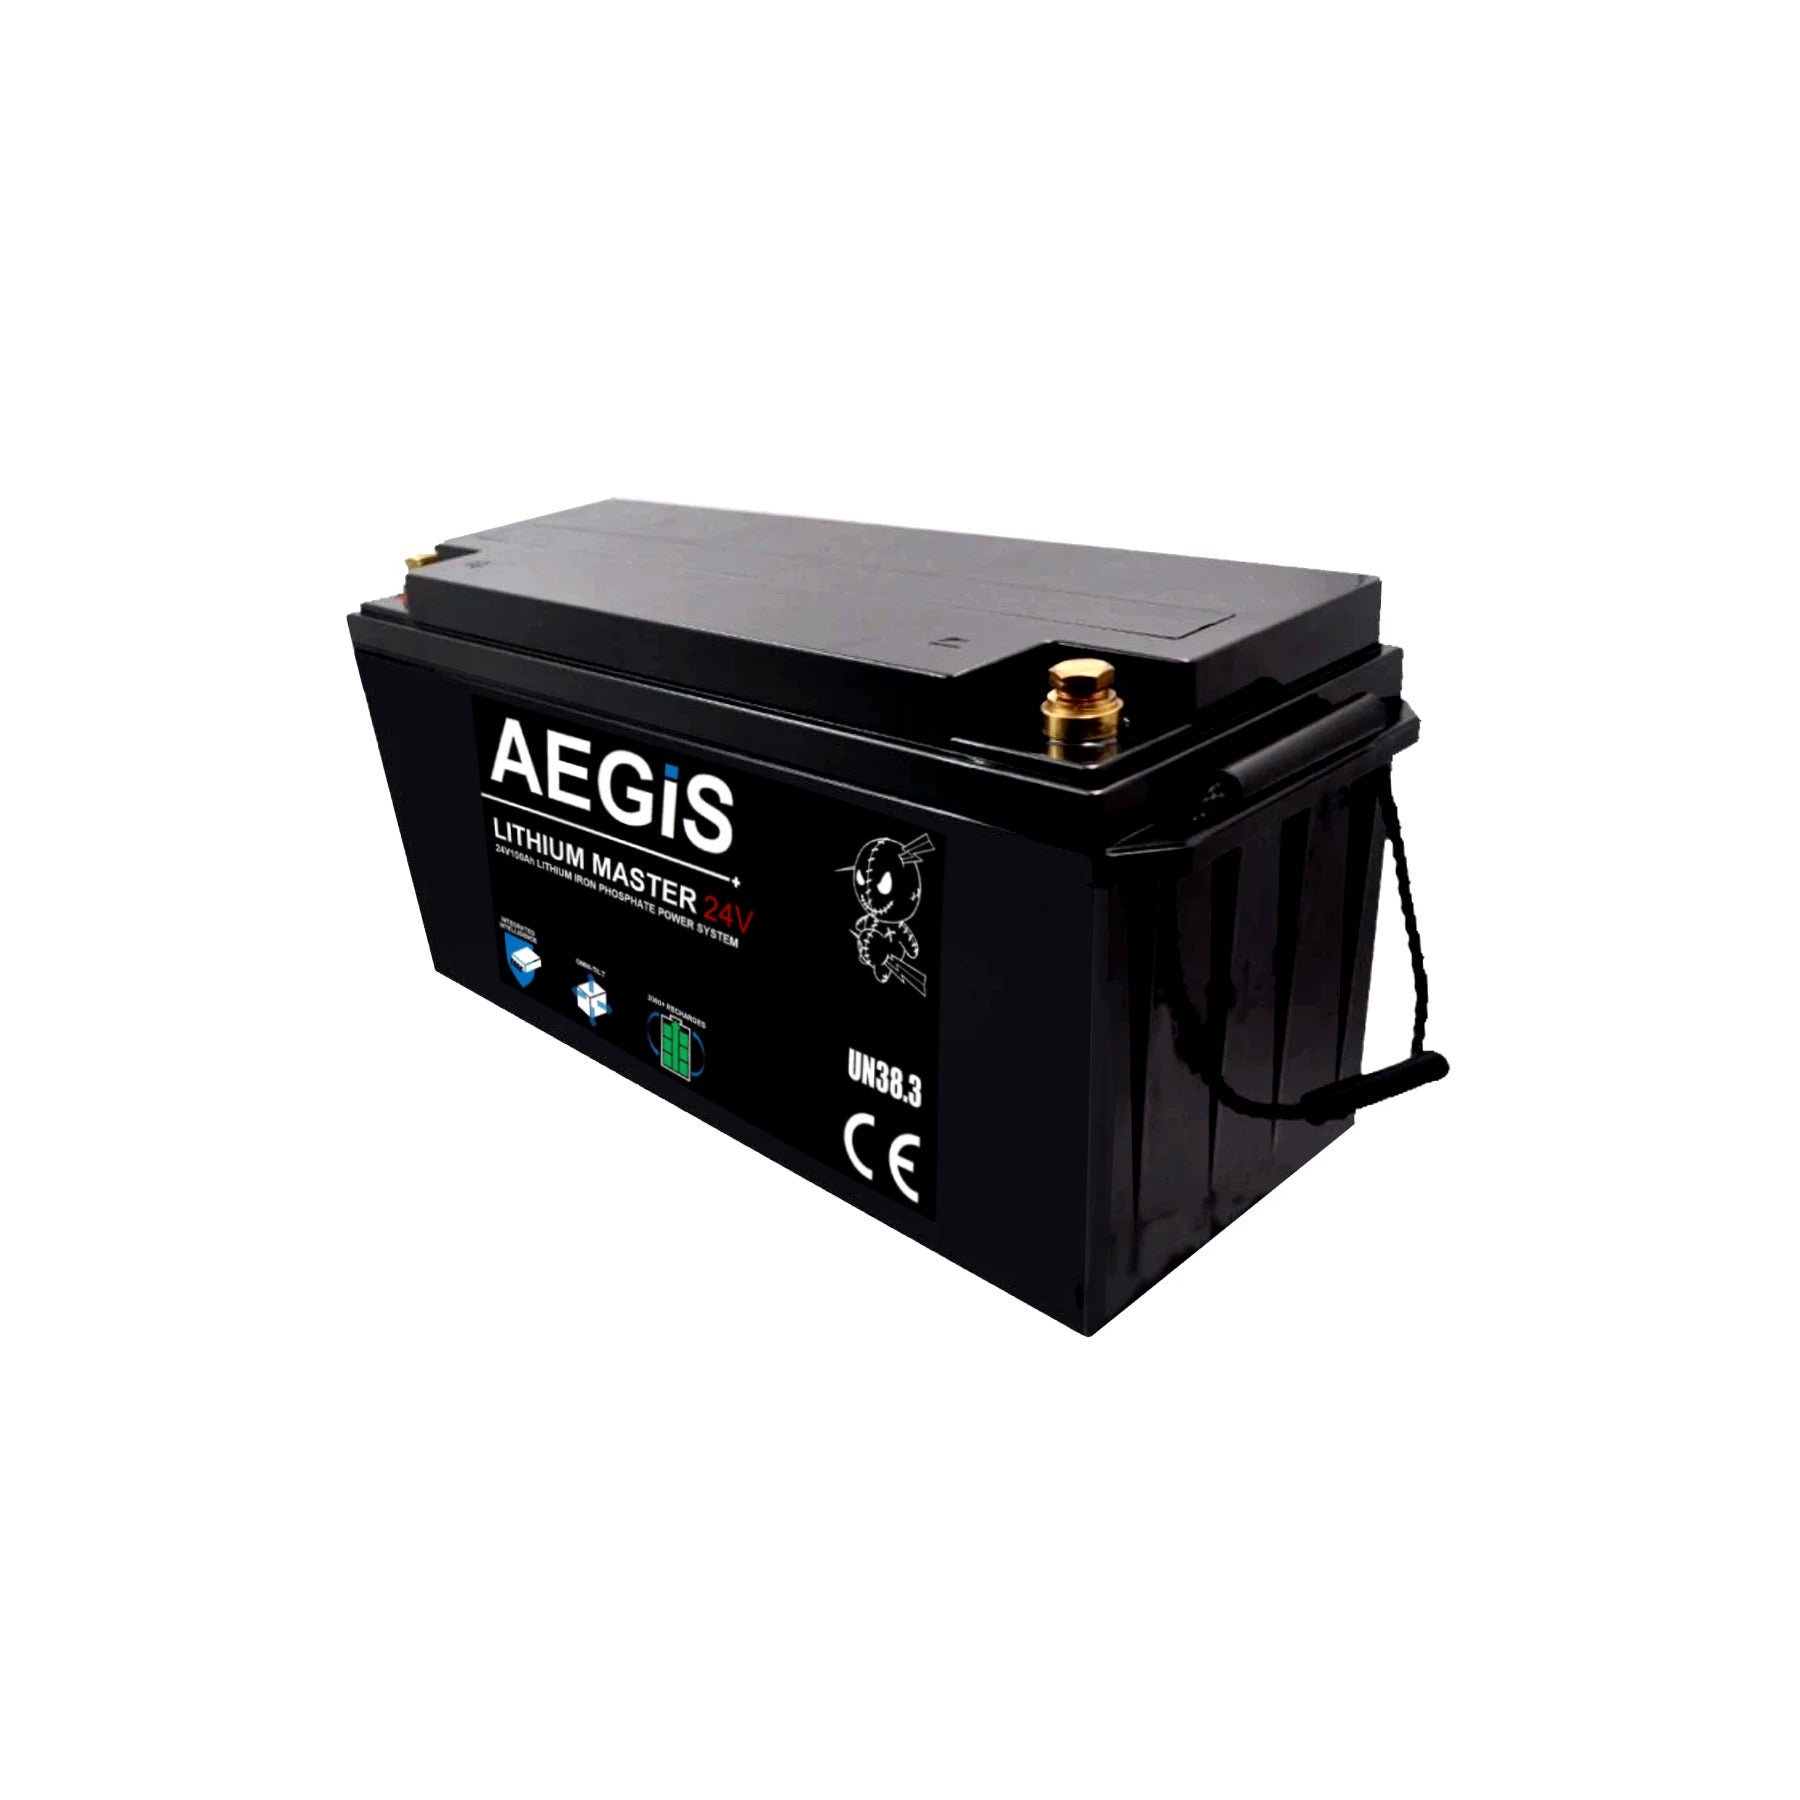 24V 25A Li-ion Battery Charger - Aegis Battery Lithium ion